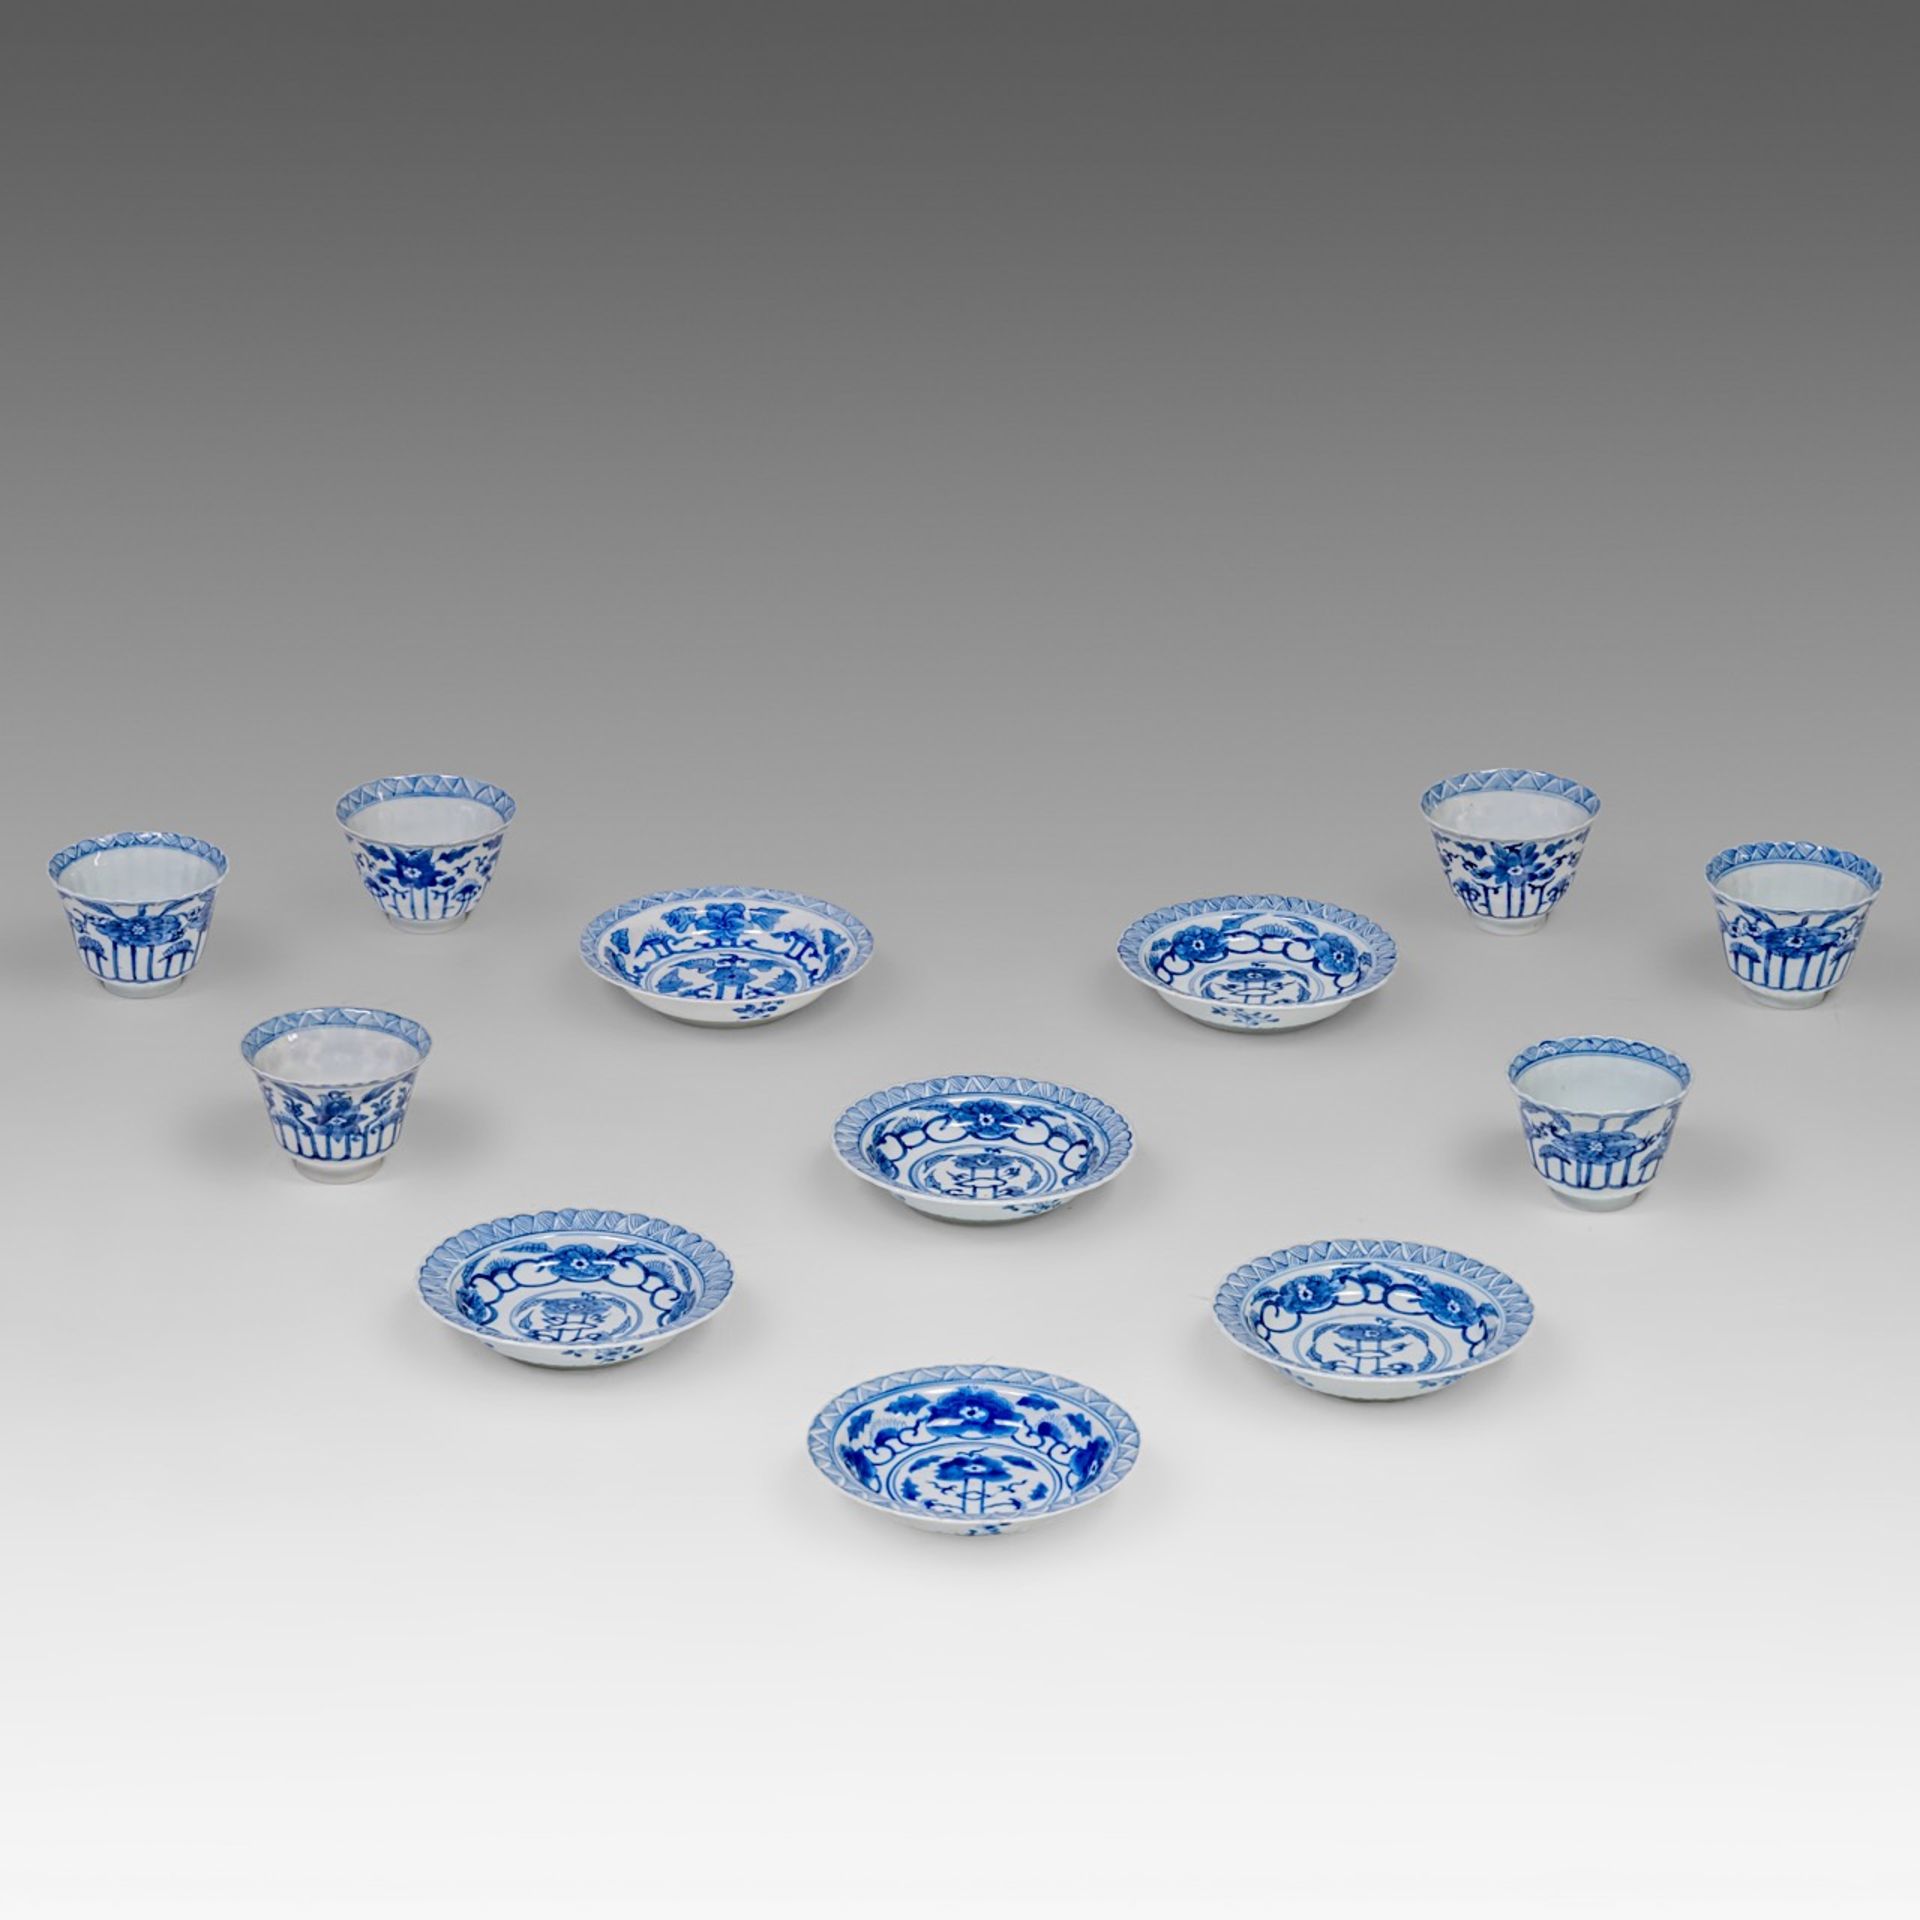 Six matching sets of Chinese blue and white floral decorated tea cups and saucers, Kangxi period, di